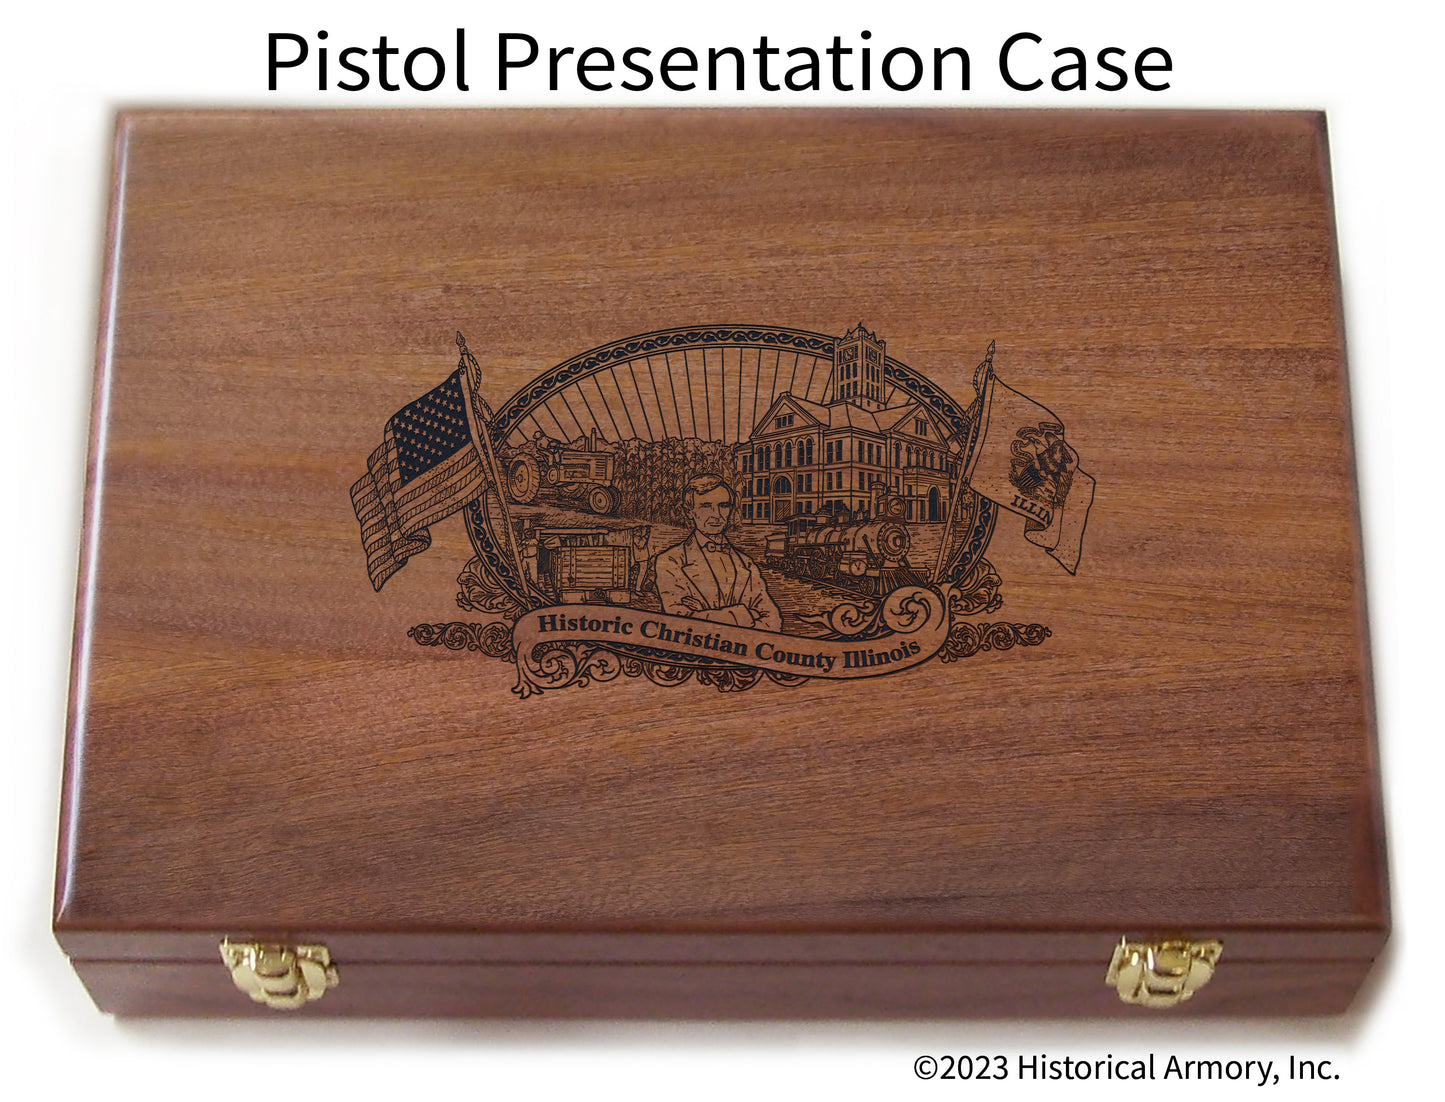 Christian County Illinois Engraved .45 Auto Ruger 1911 Presentation Case